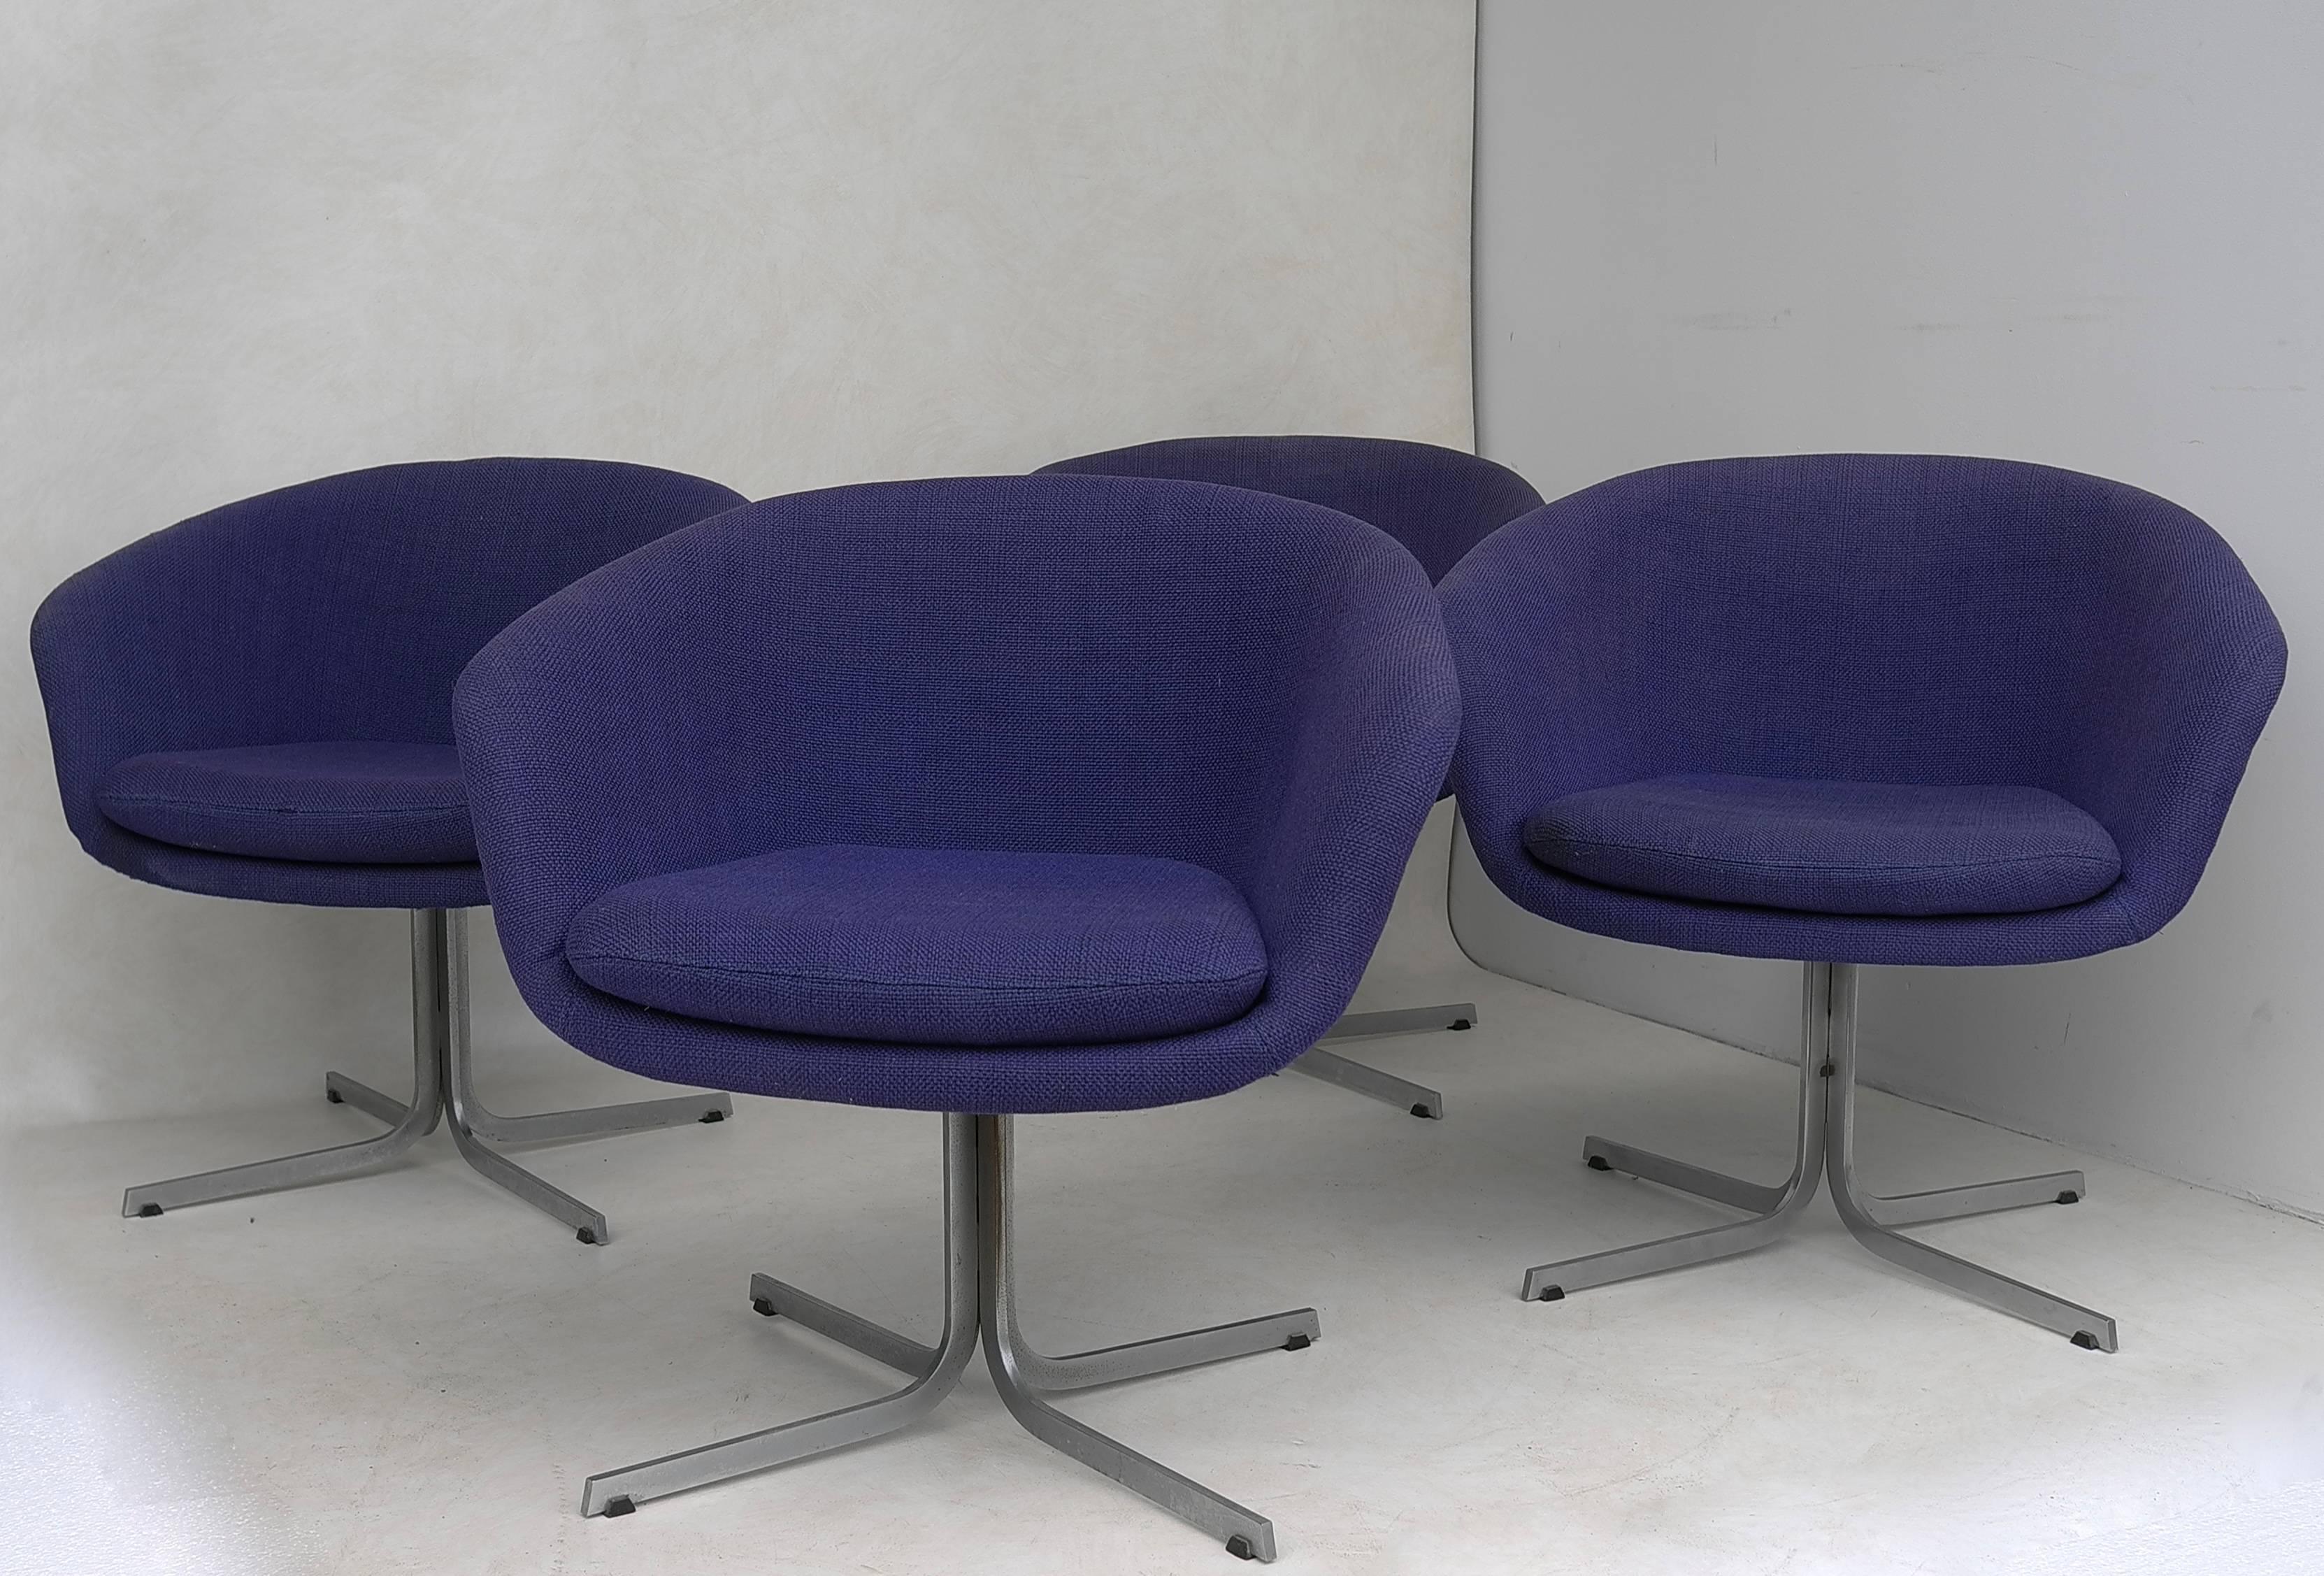 French Rare Set of Four Pierre Paulin F8800 Tulip Chairs by Artifort, 1963